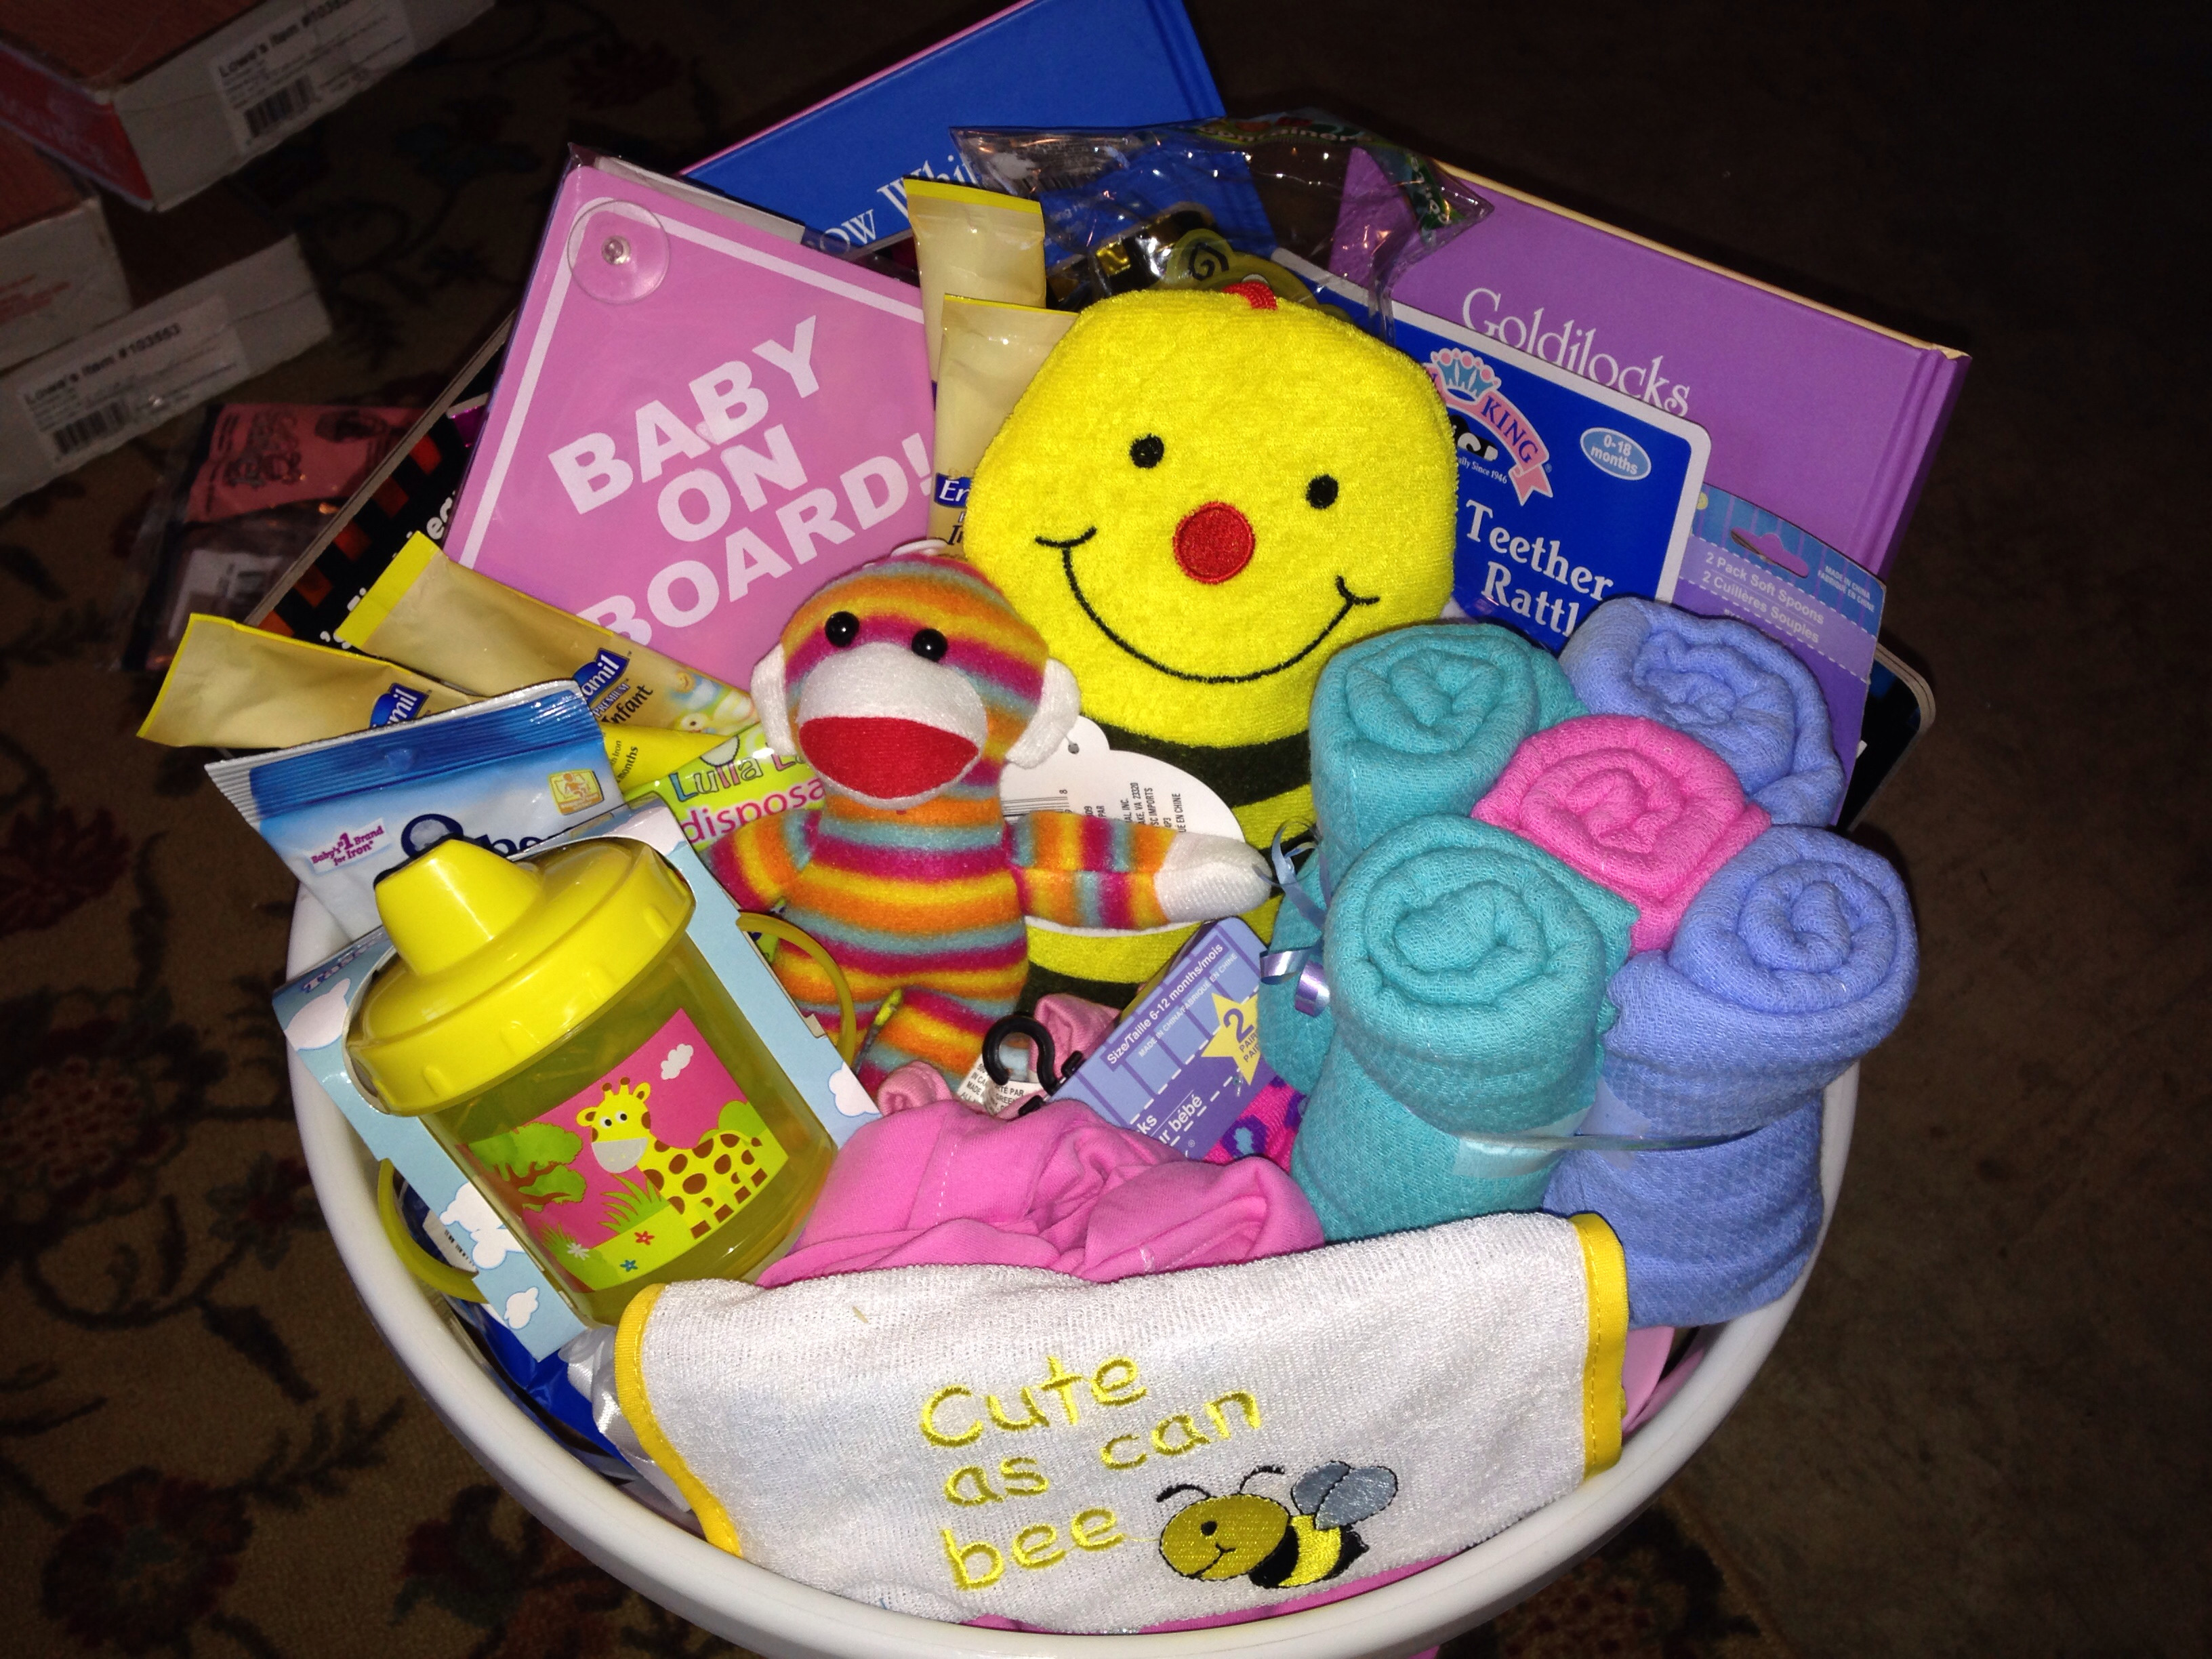 DIY Baby Shower Gift Basket
 The gallery for Homemade Baby Shower Gift Baskets